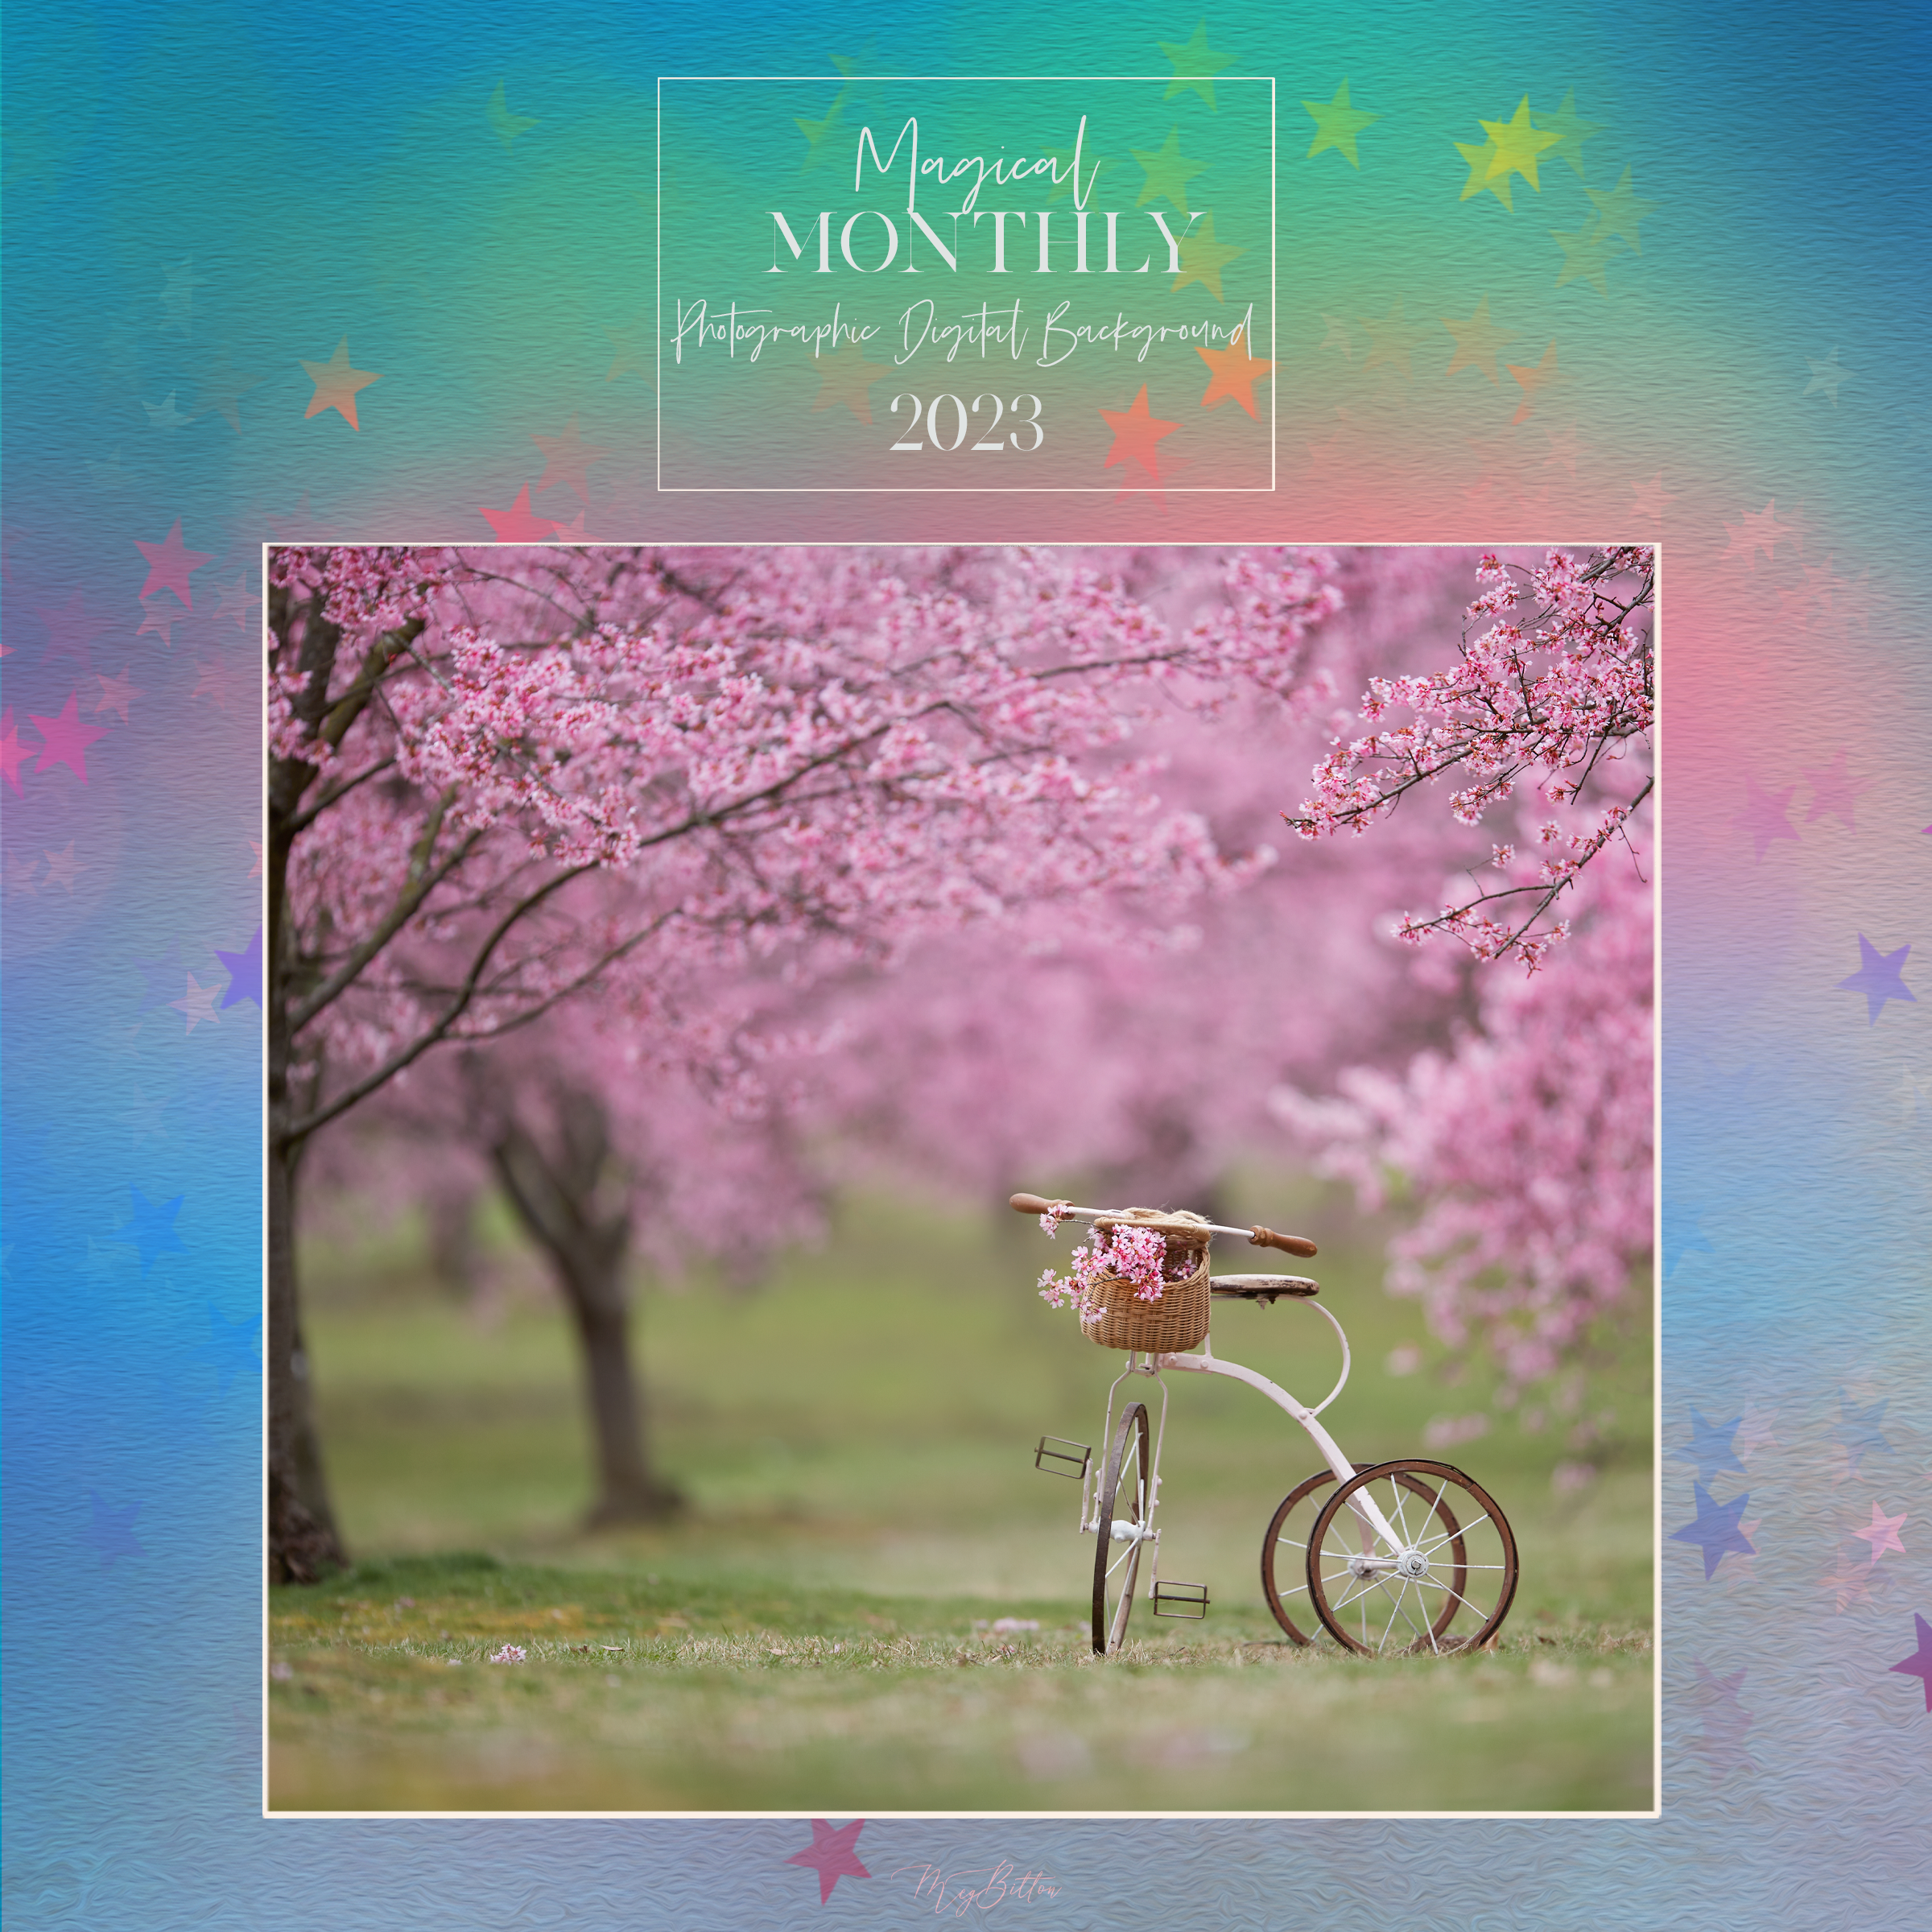 Magical Monthly Photographic Digital Background 2023 - Meg Bitton Productions